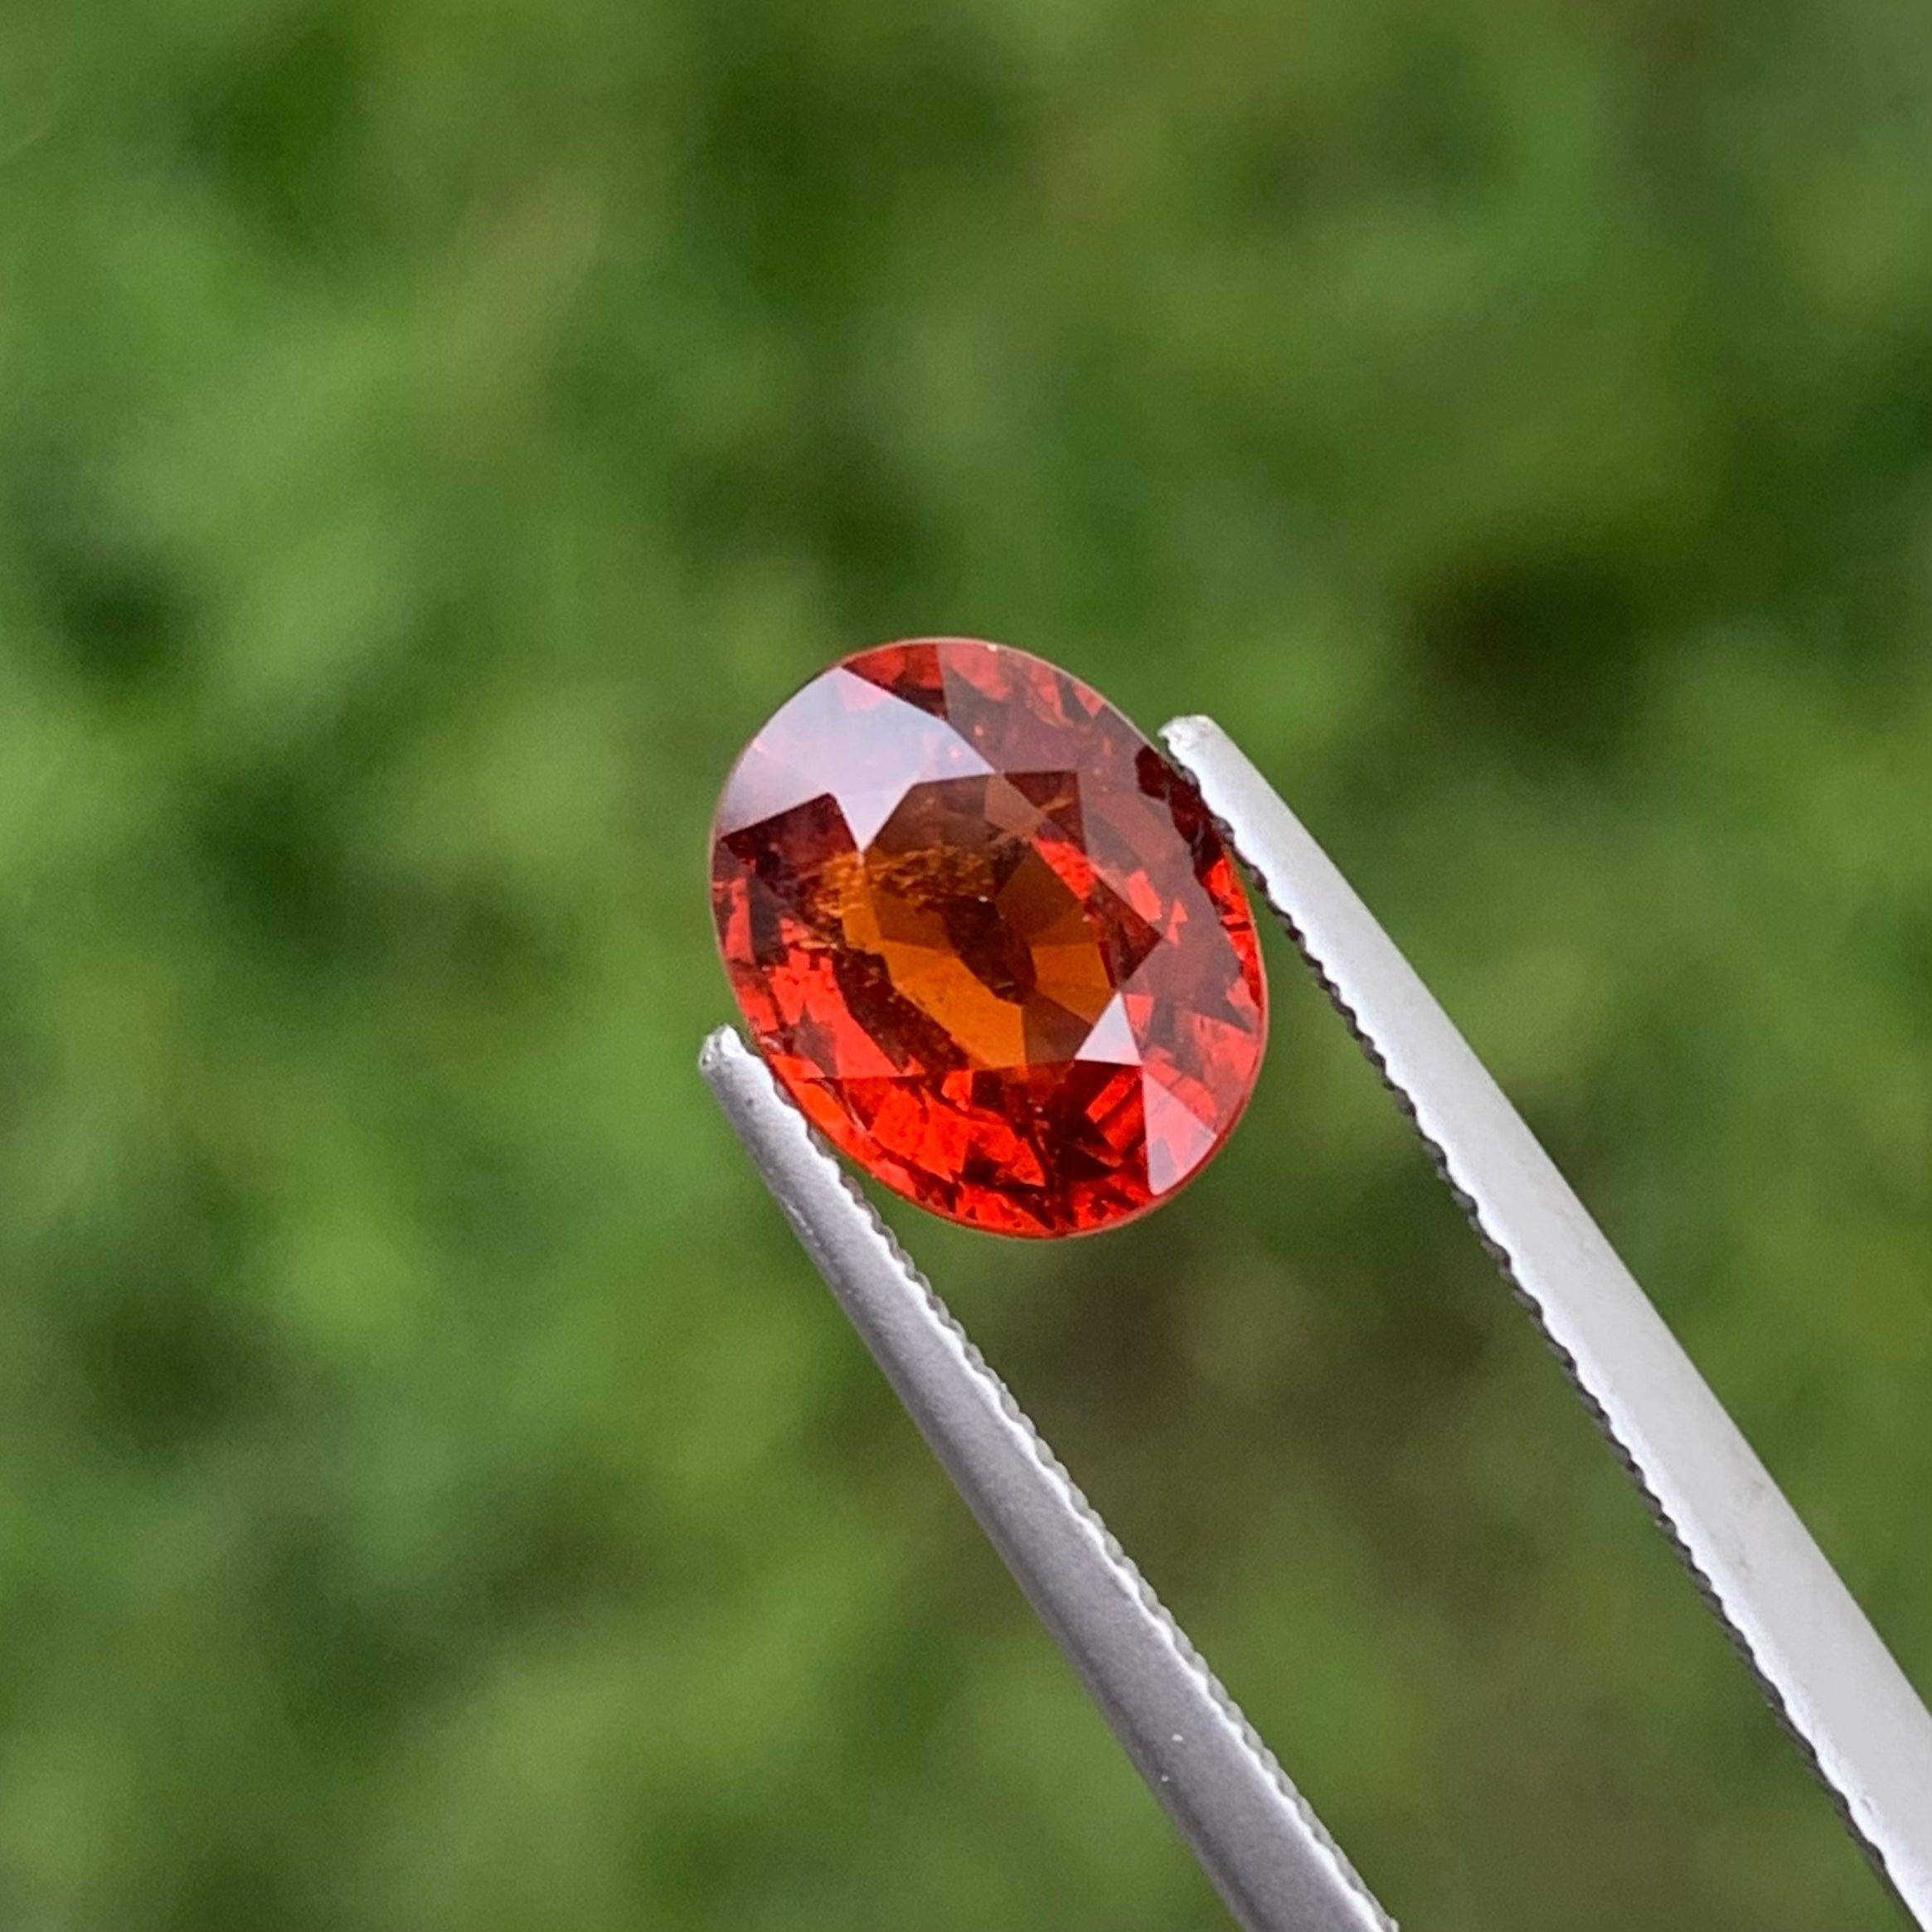 Lovely Orange Red Spessartite Garnet, Available For Sale at Wholesale Price Natural High Quality 2.80 Carats Unheated  Garnet Gemstone From Madagascar.

 

Product Information:
GEMSTONE NAME: Lovely Orange Red Spessartite Garnet
WEIGHT: 2.80